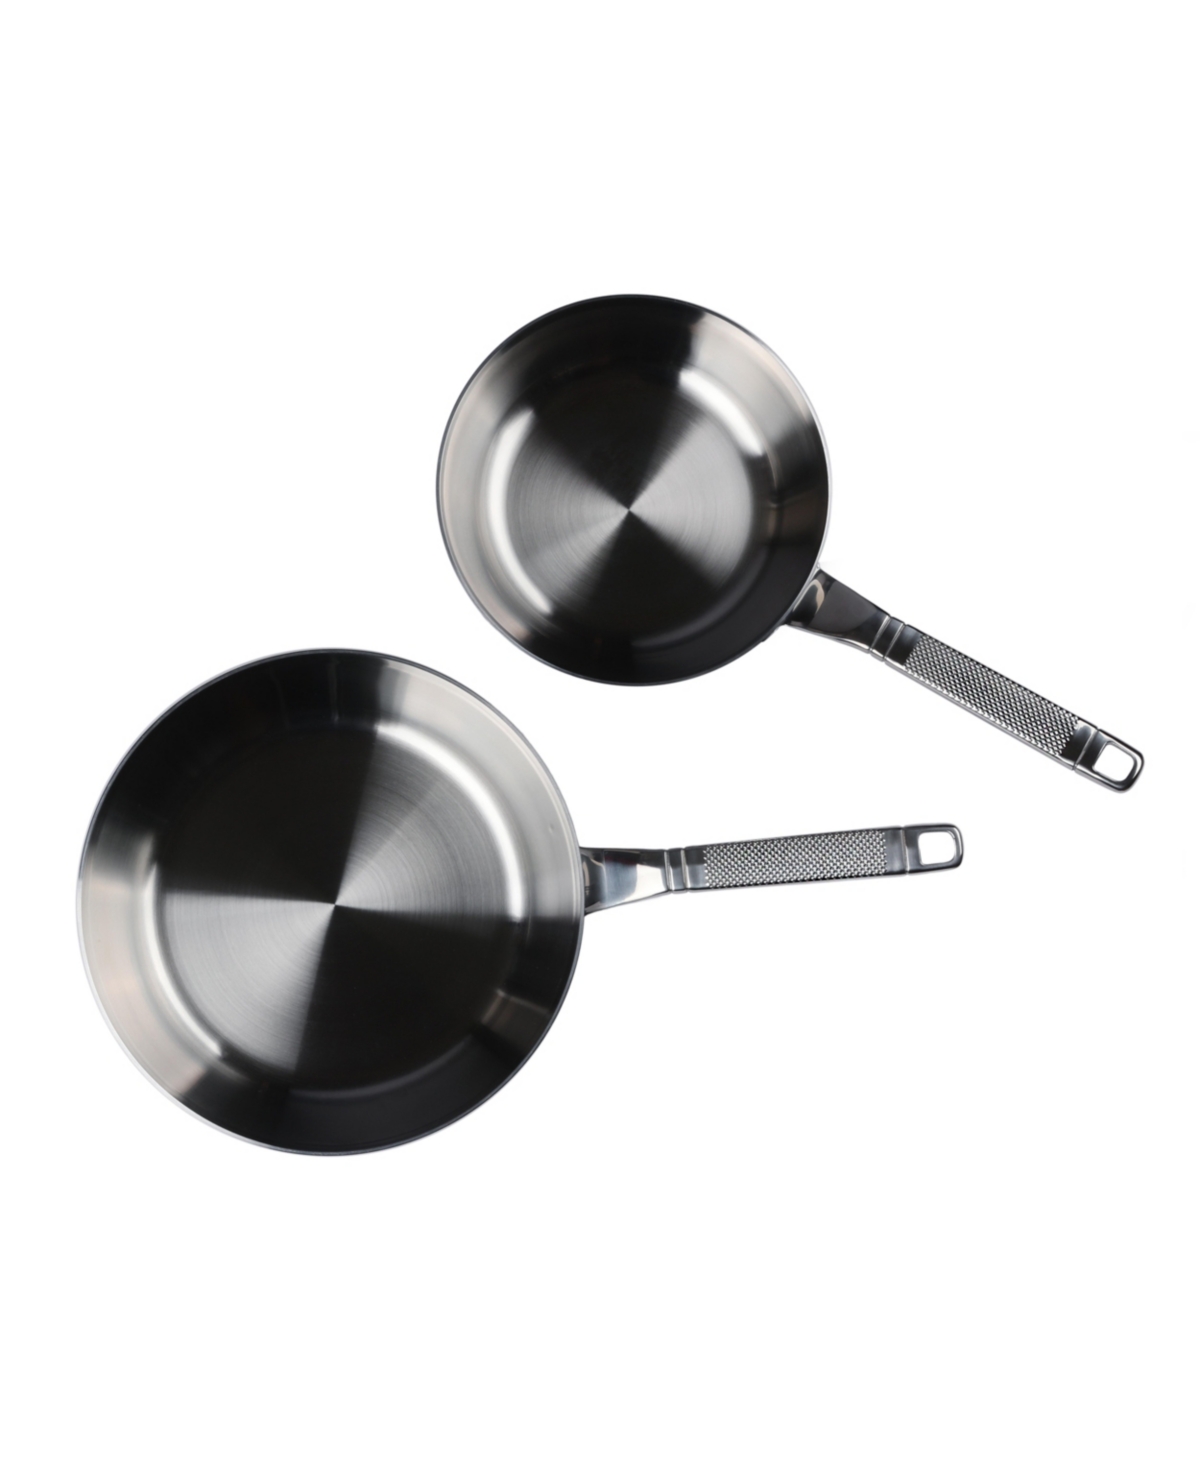 Saveur Selects Voyage Series Tri-ply Stainless Steel 2-pc. Fry Pan Set In Silver